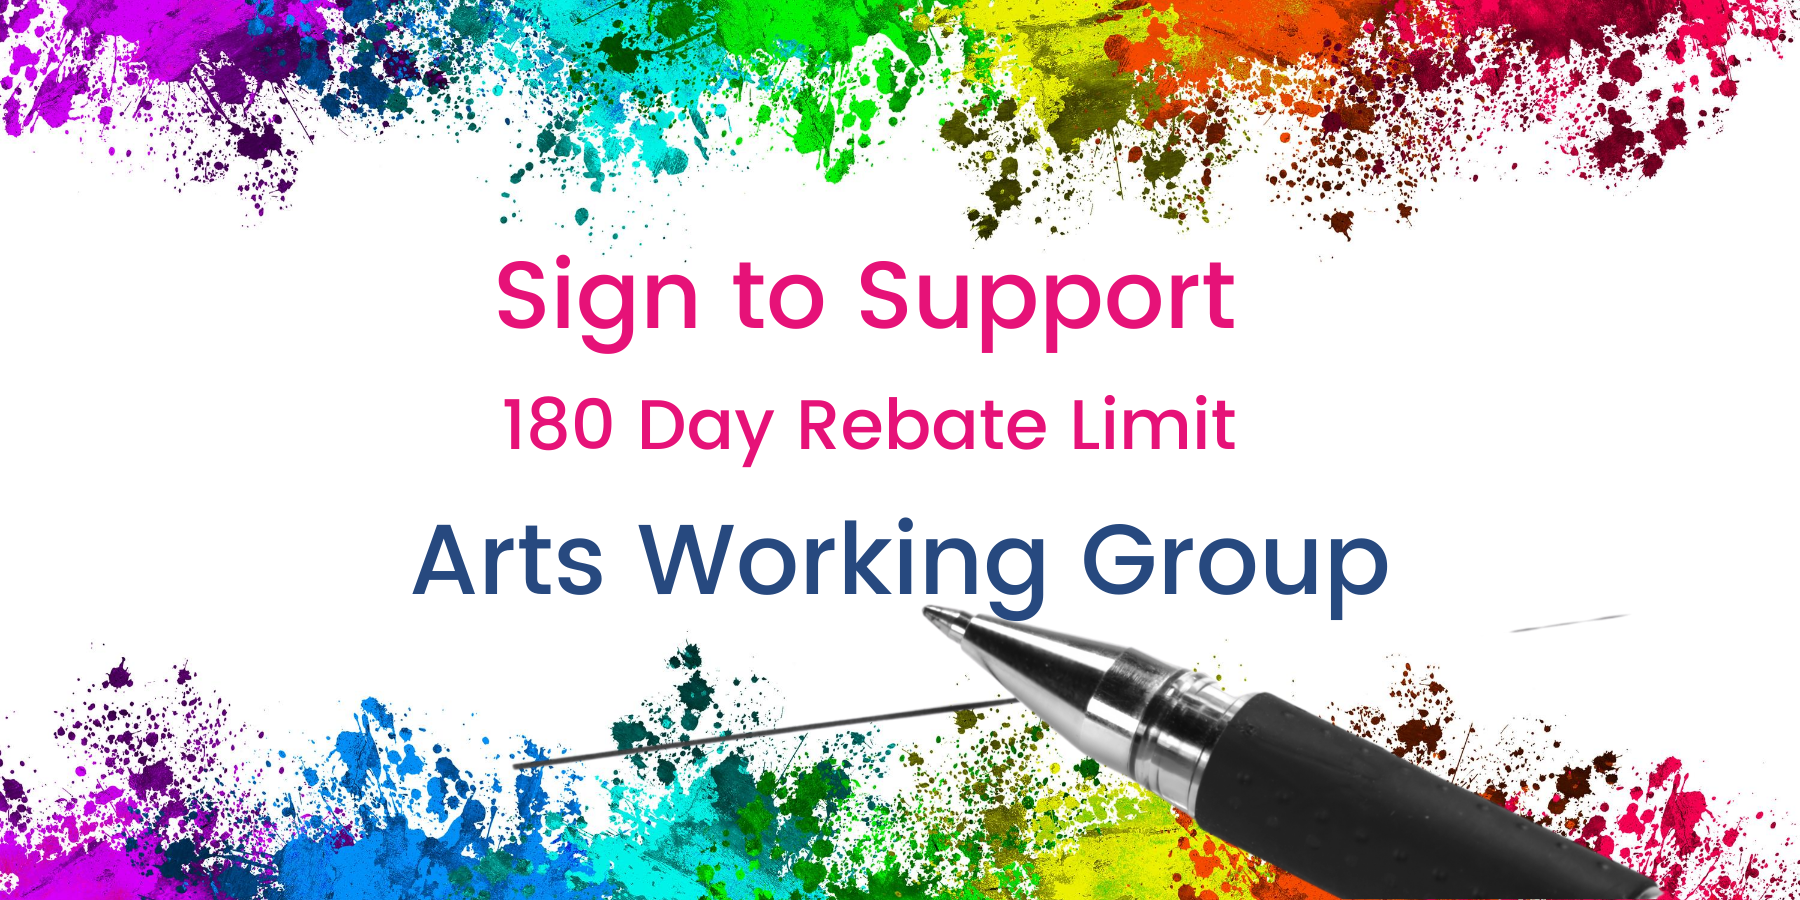 Sign to Support: Arts Working Group